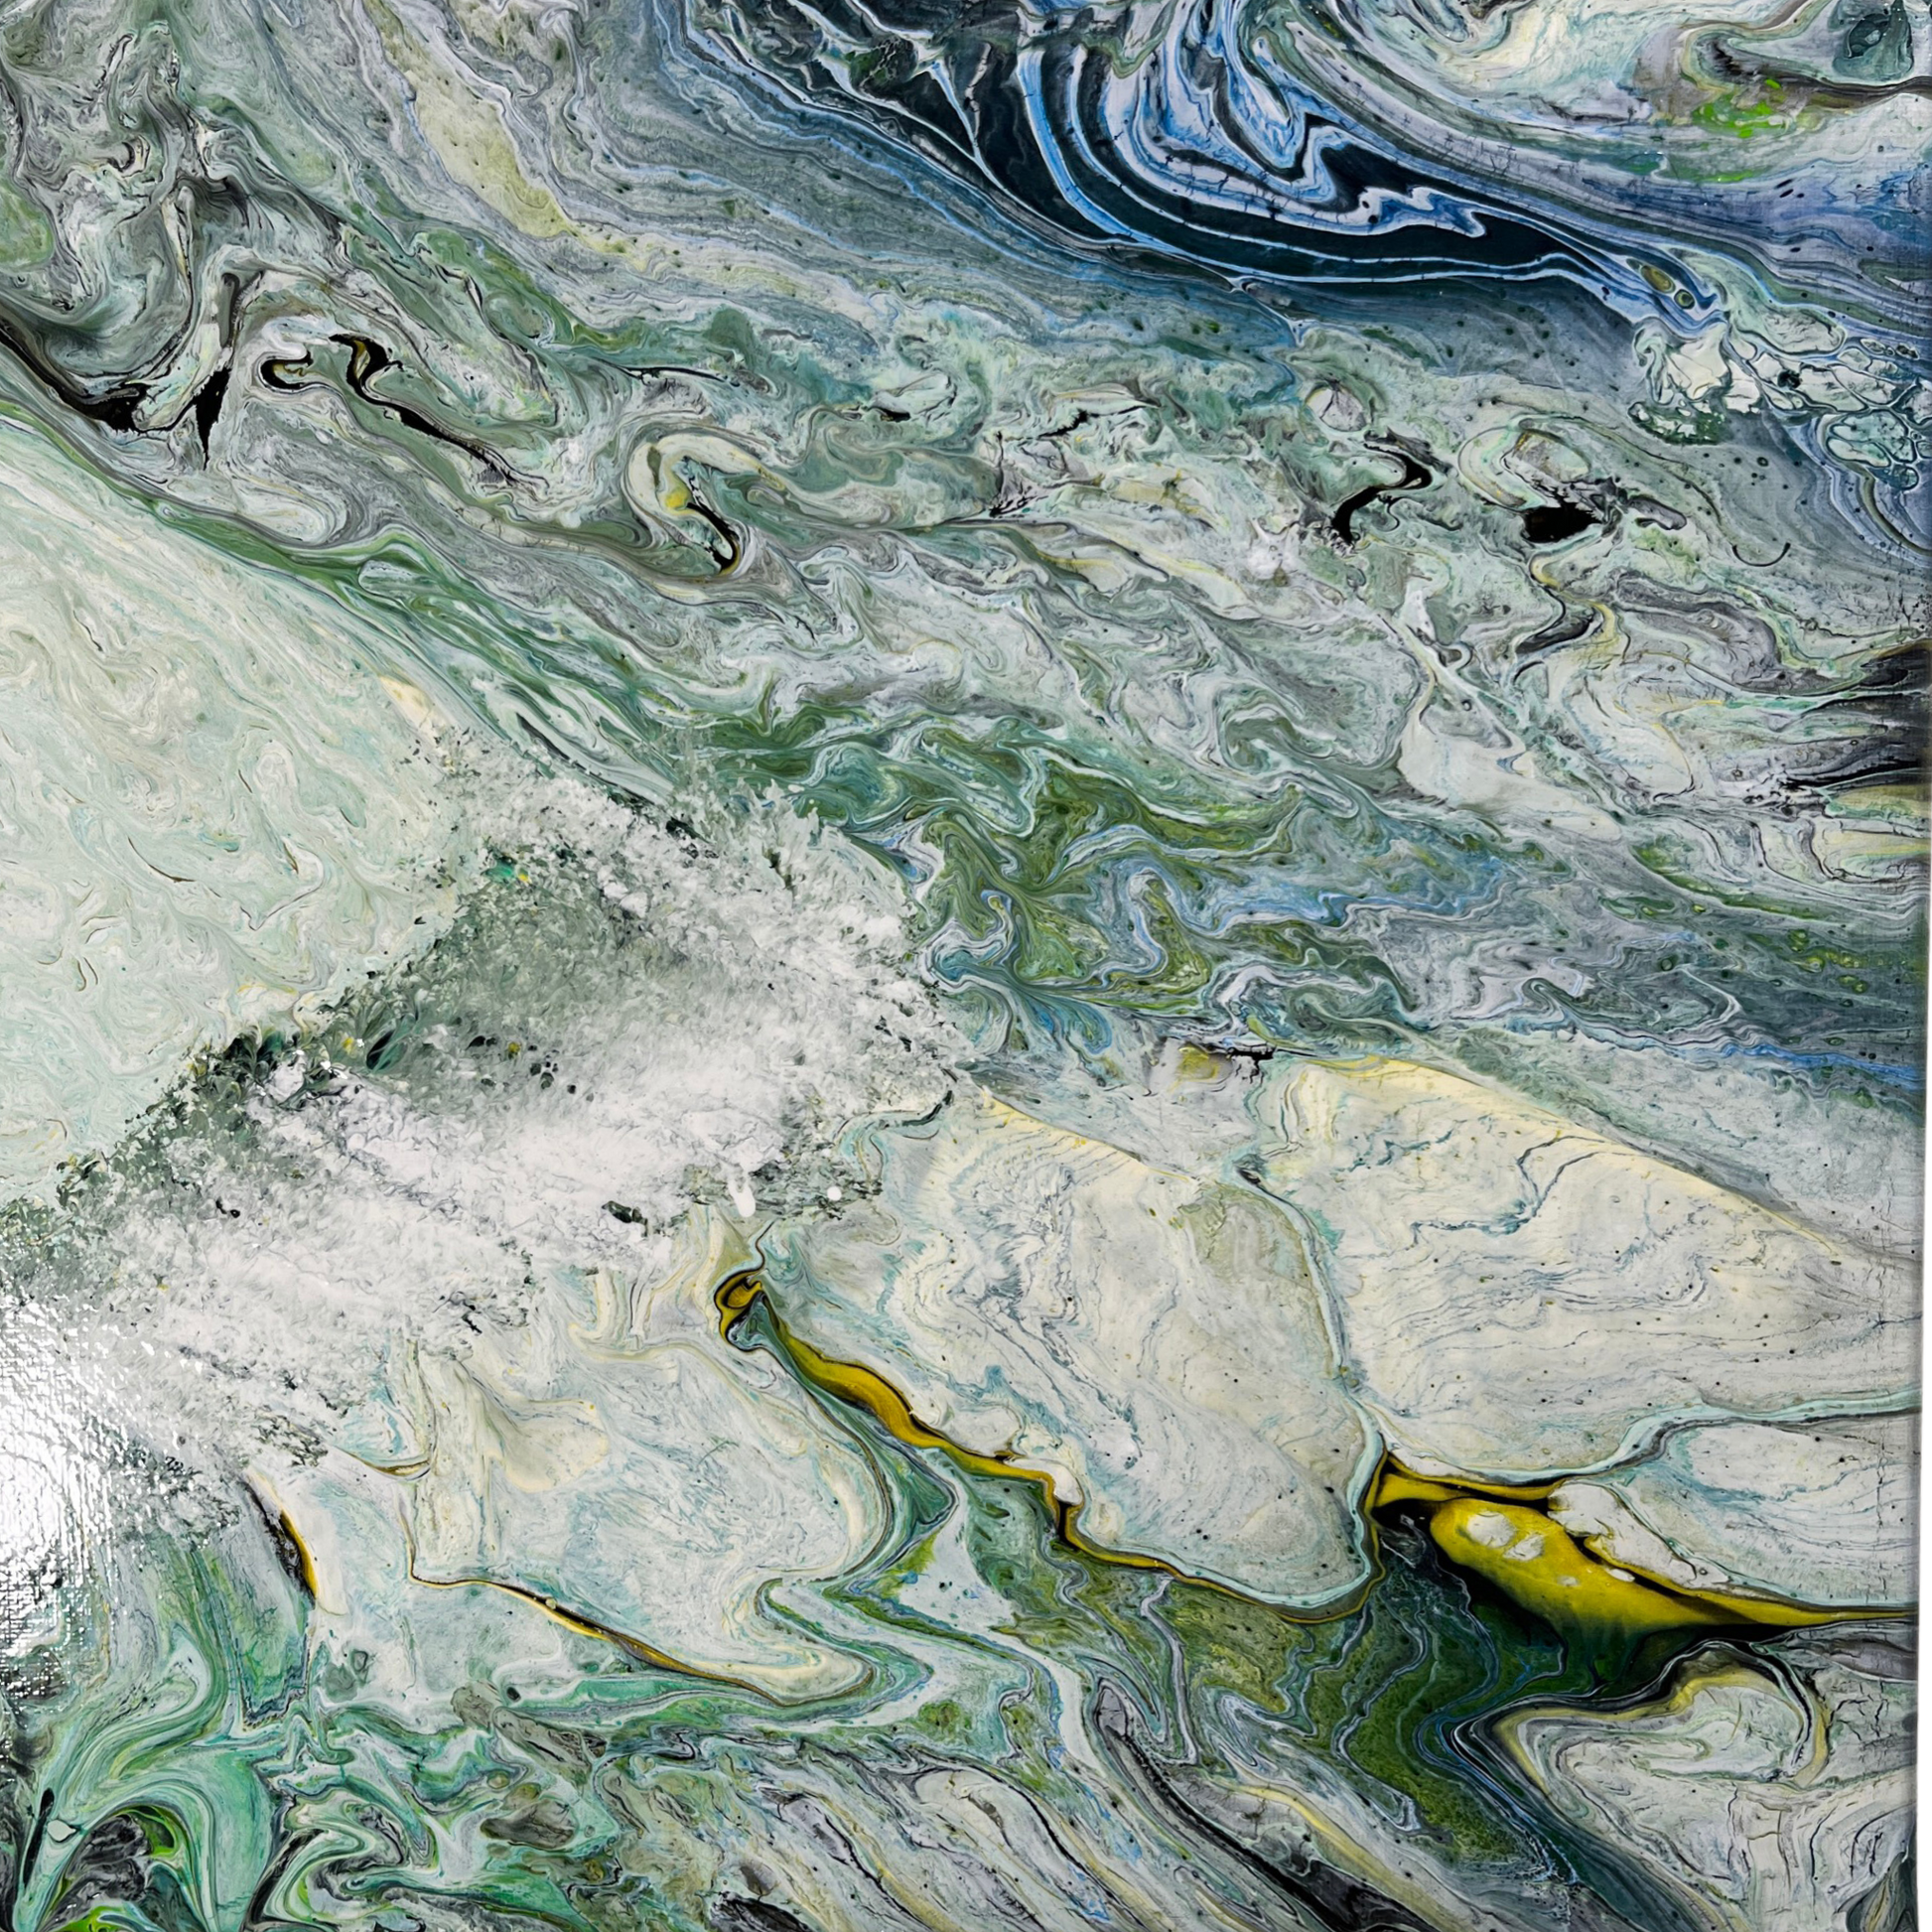 acrylic pour painting featuring cloudy whites, blues and greens, creating a unique skyscape